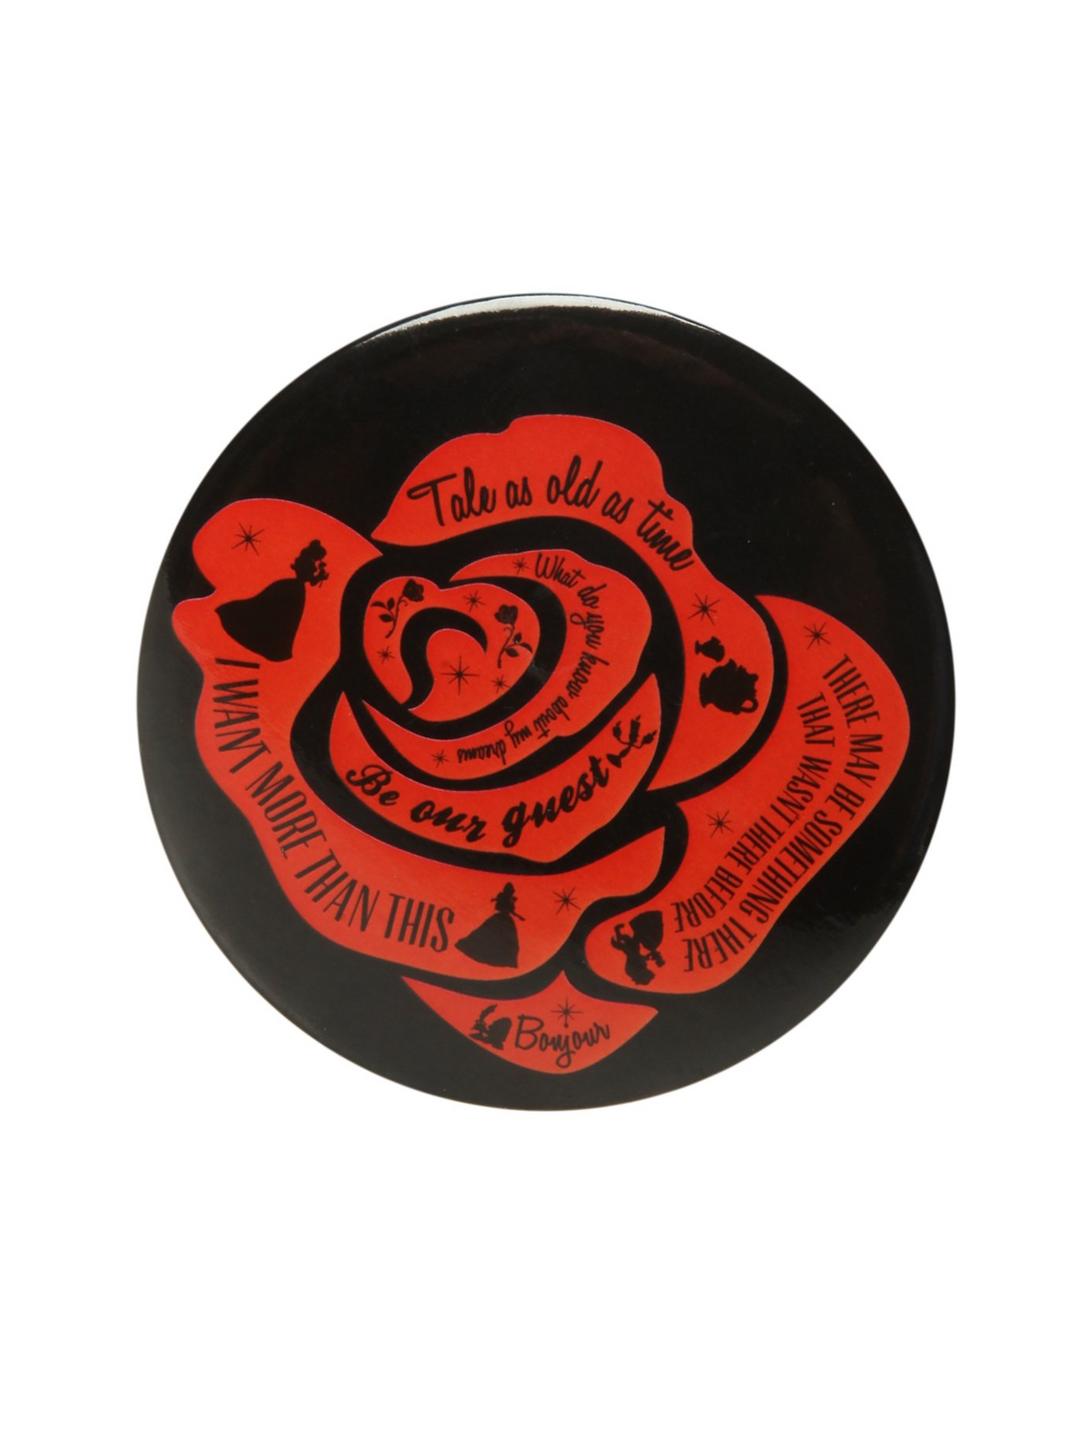 Disney Beauty And The Beast Enchanted Rose Button Mirror, , hi-res